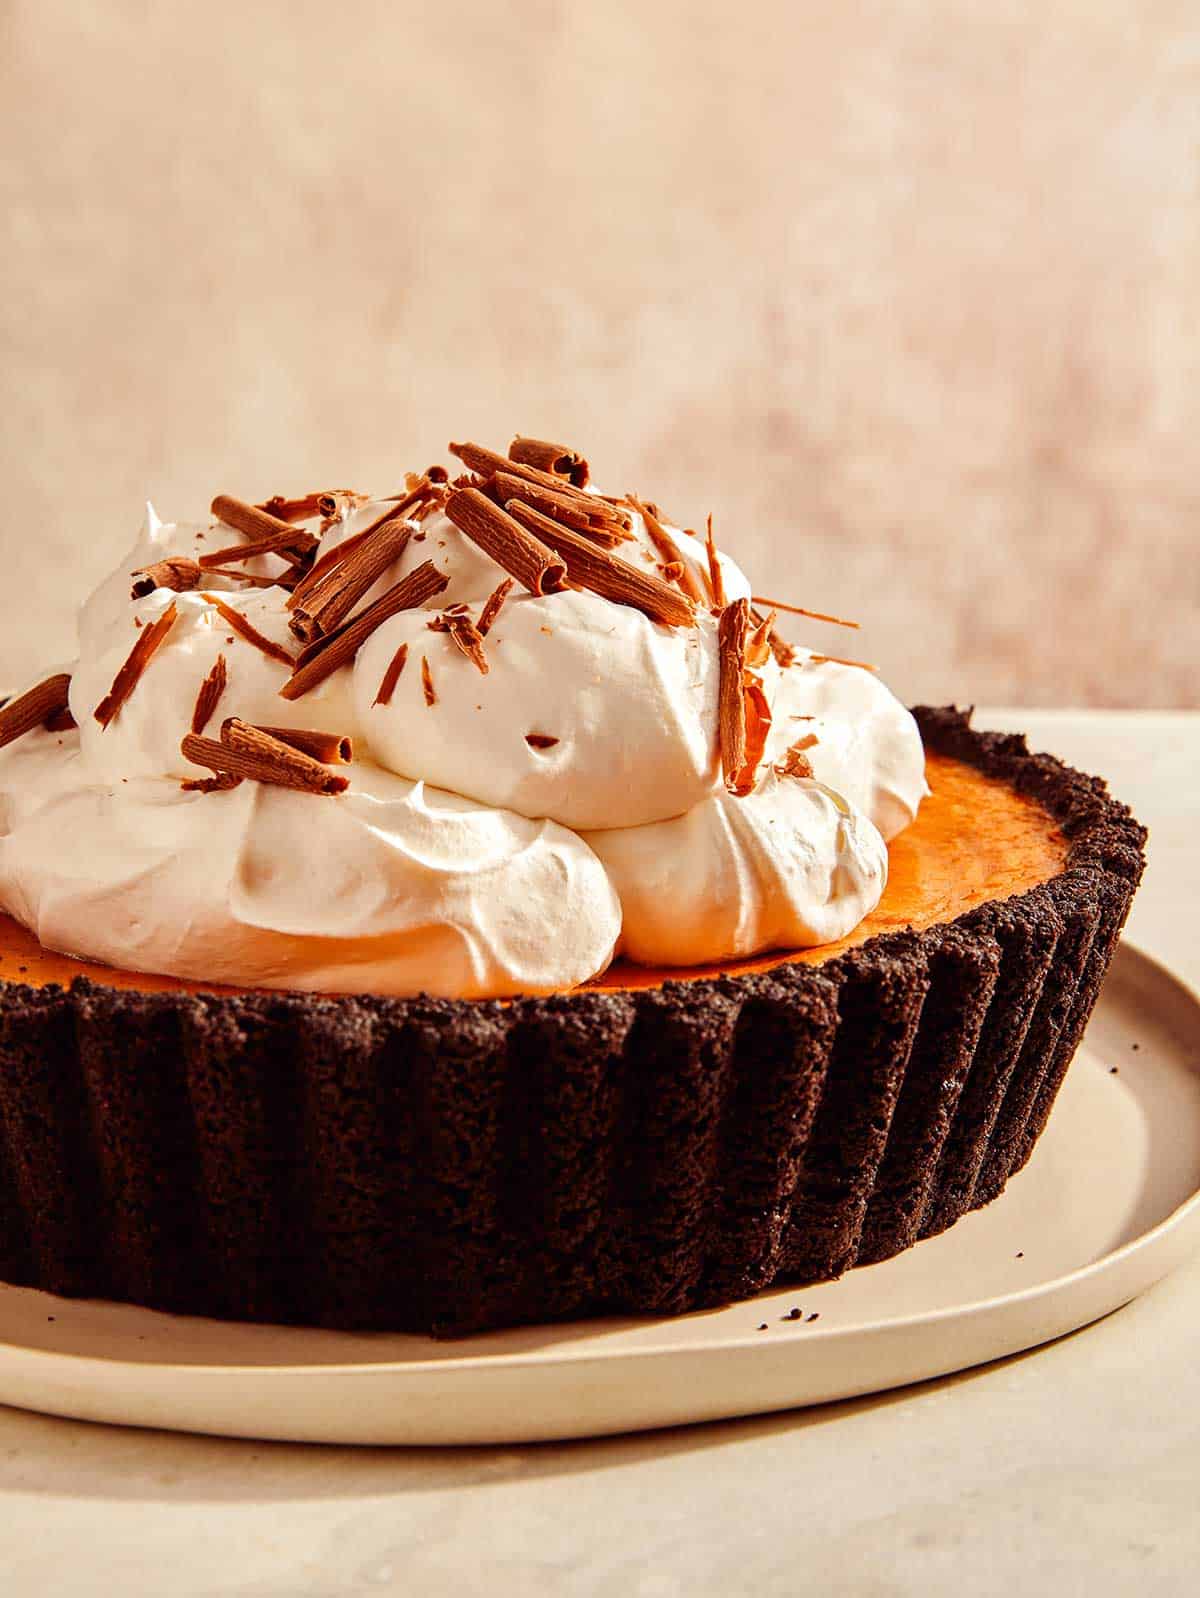 Pumpkin pie with a chocolate crust with whipped cream and chocolate shavings. 